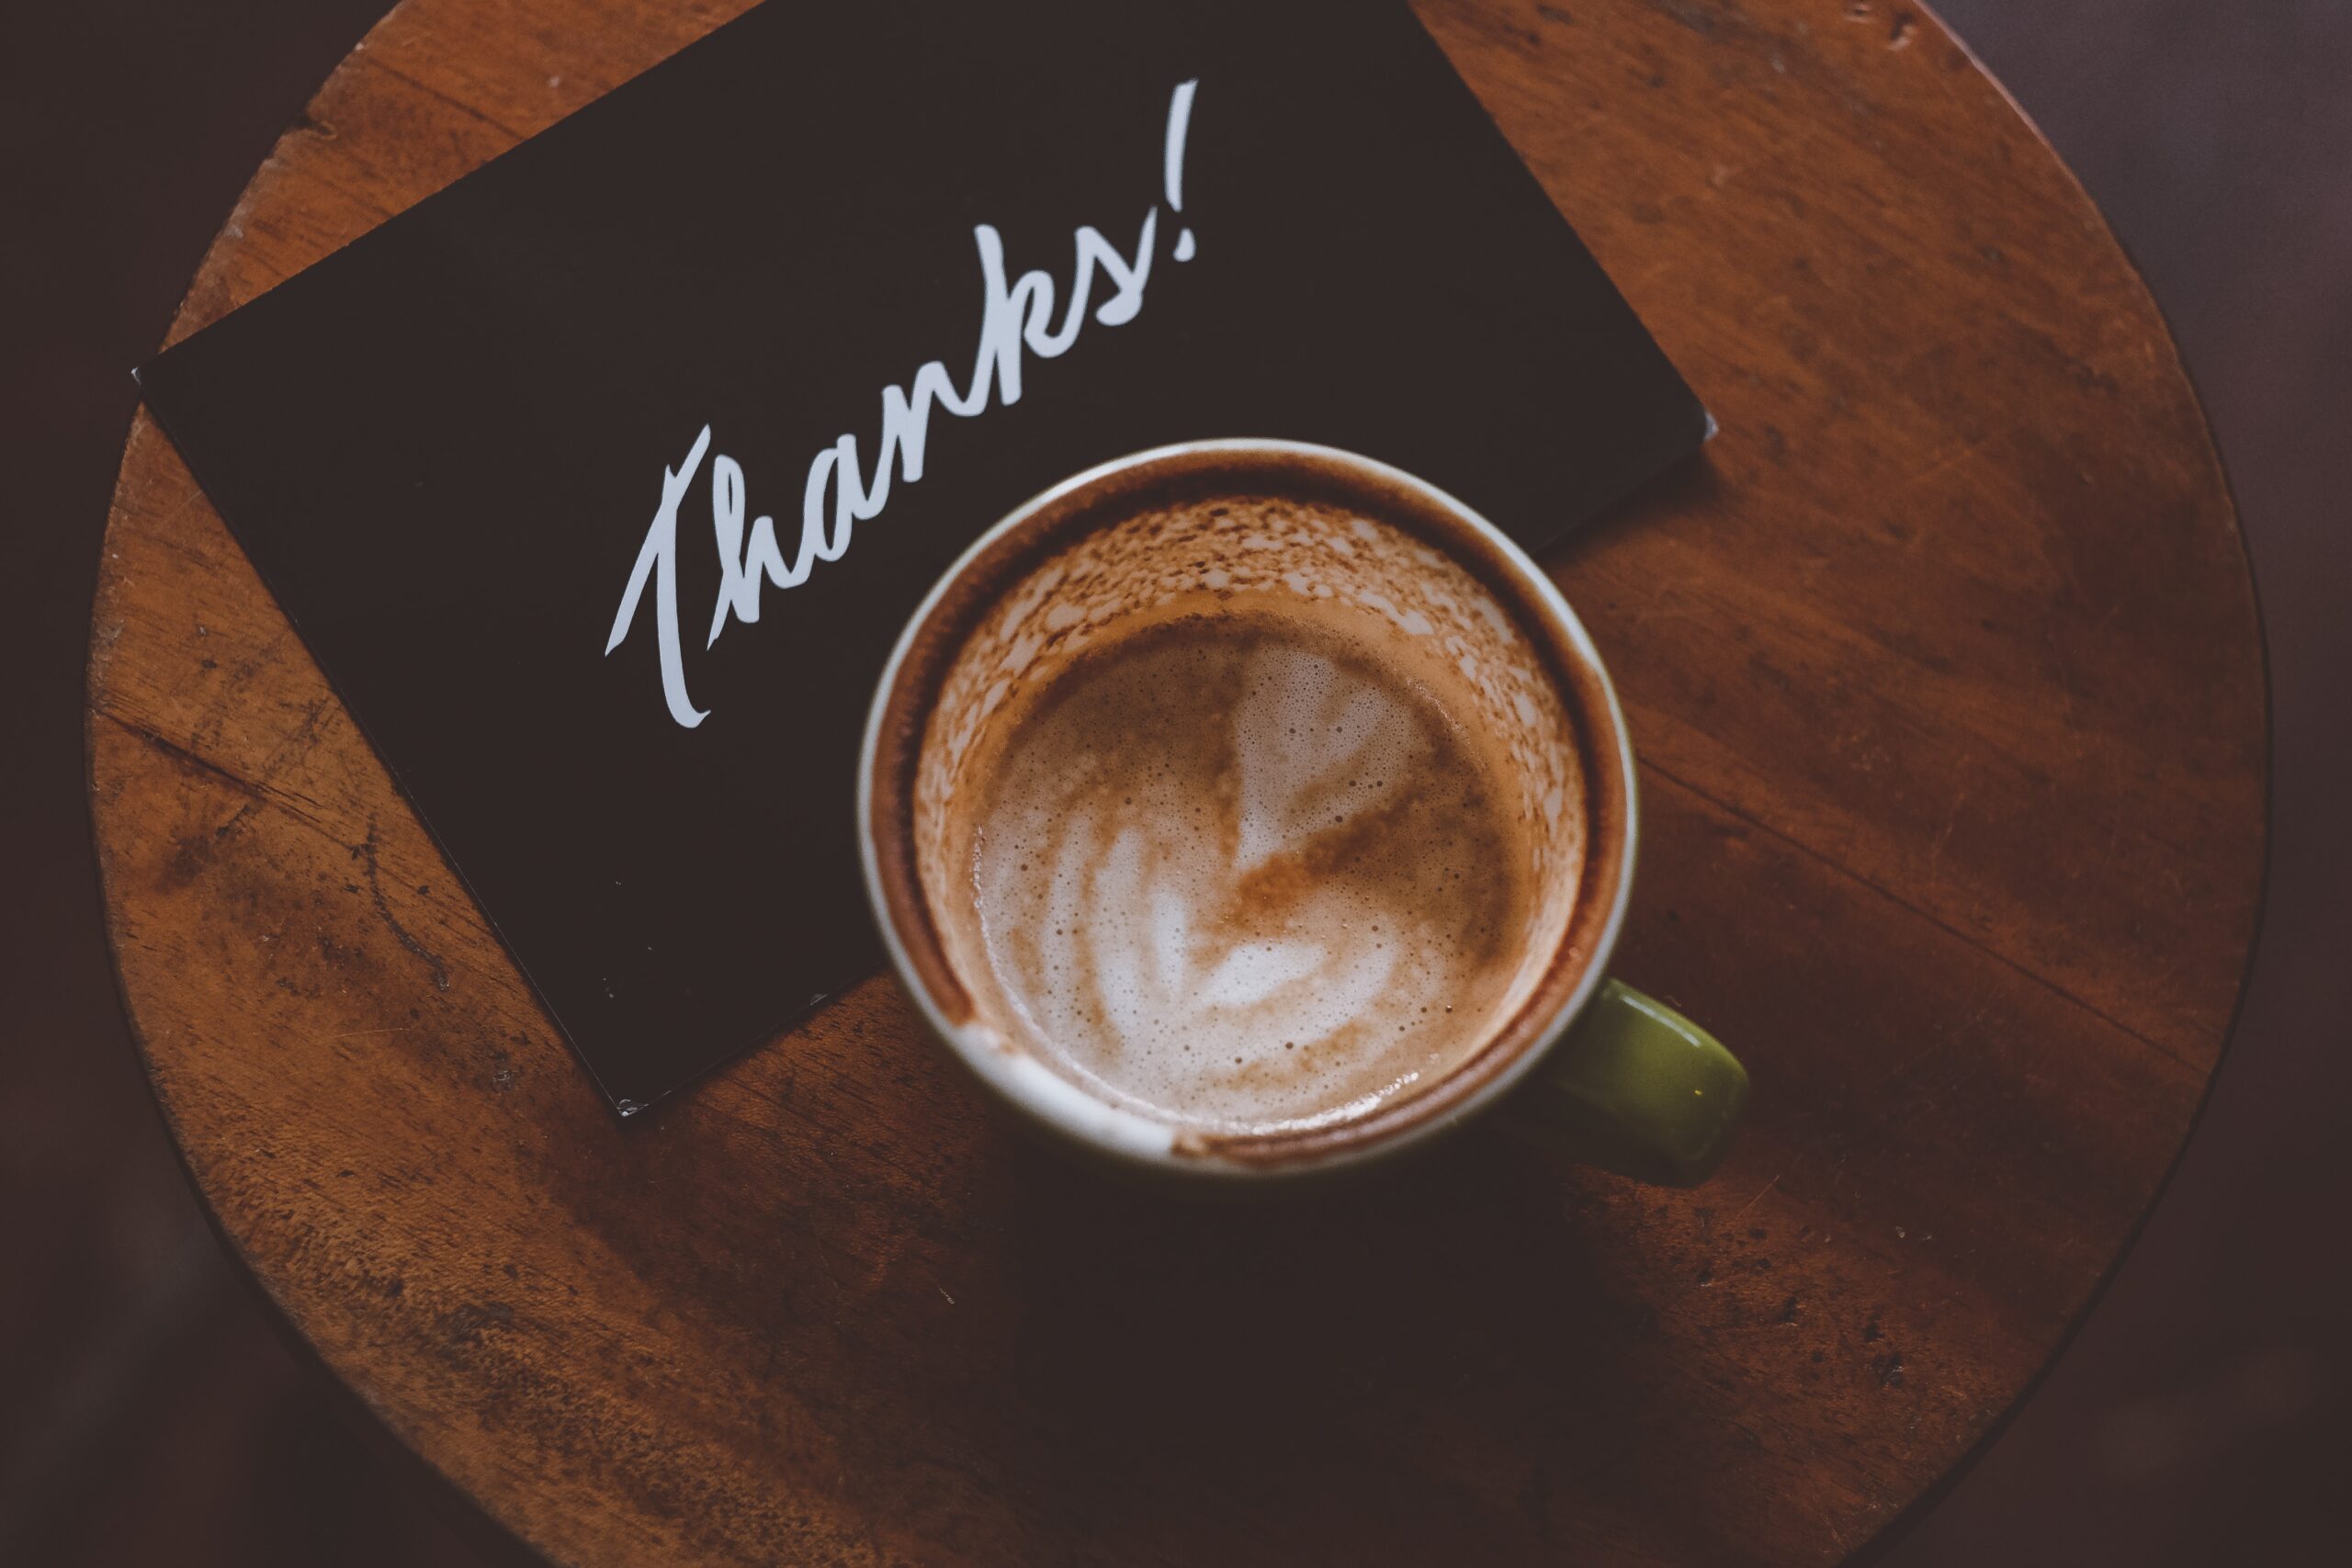 Thank You Card and cup of coffee on a table